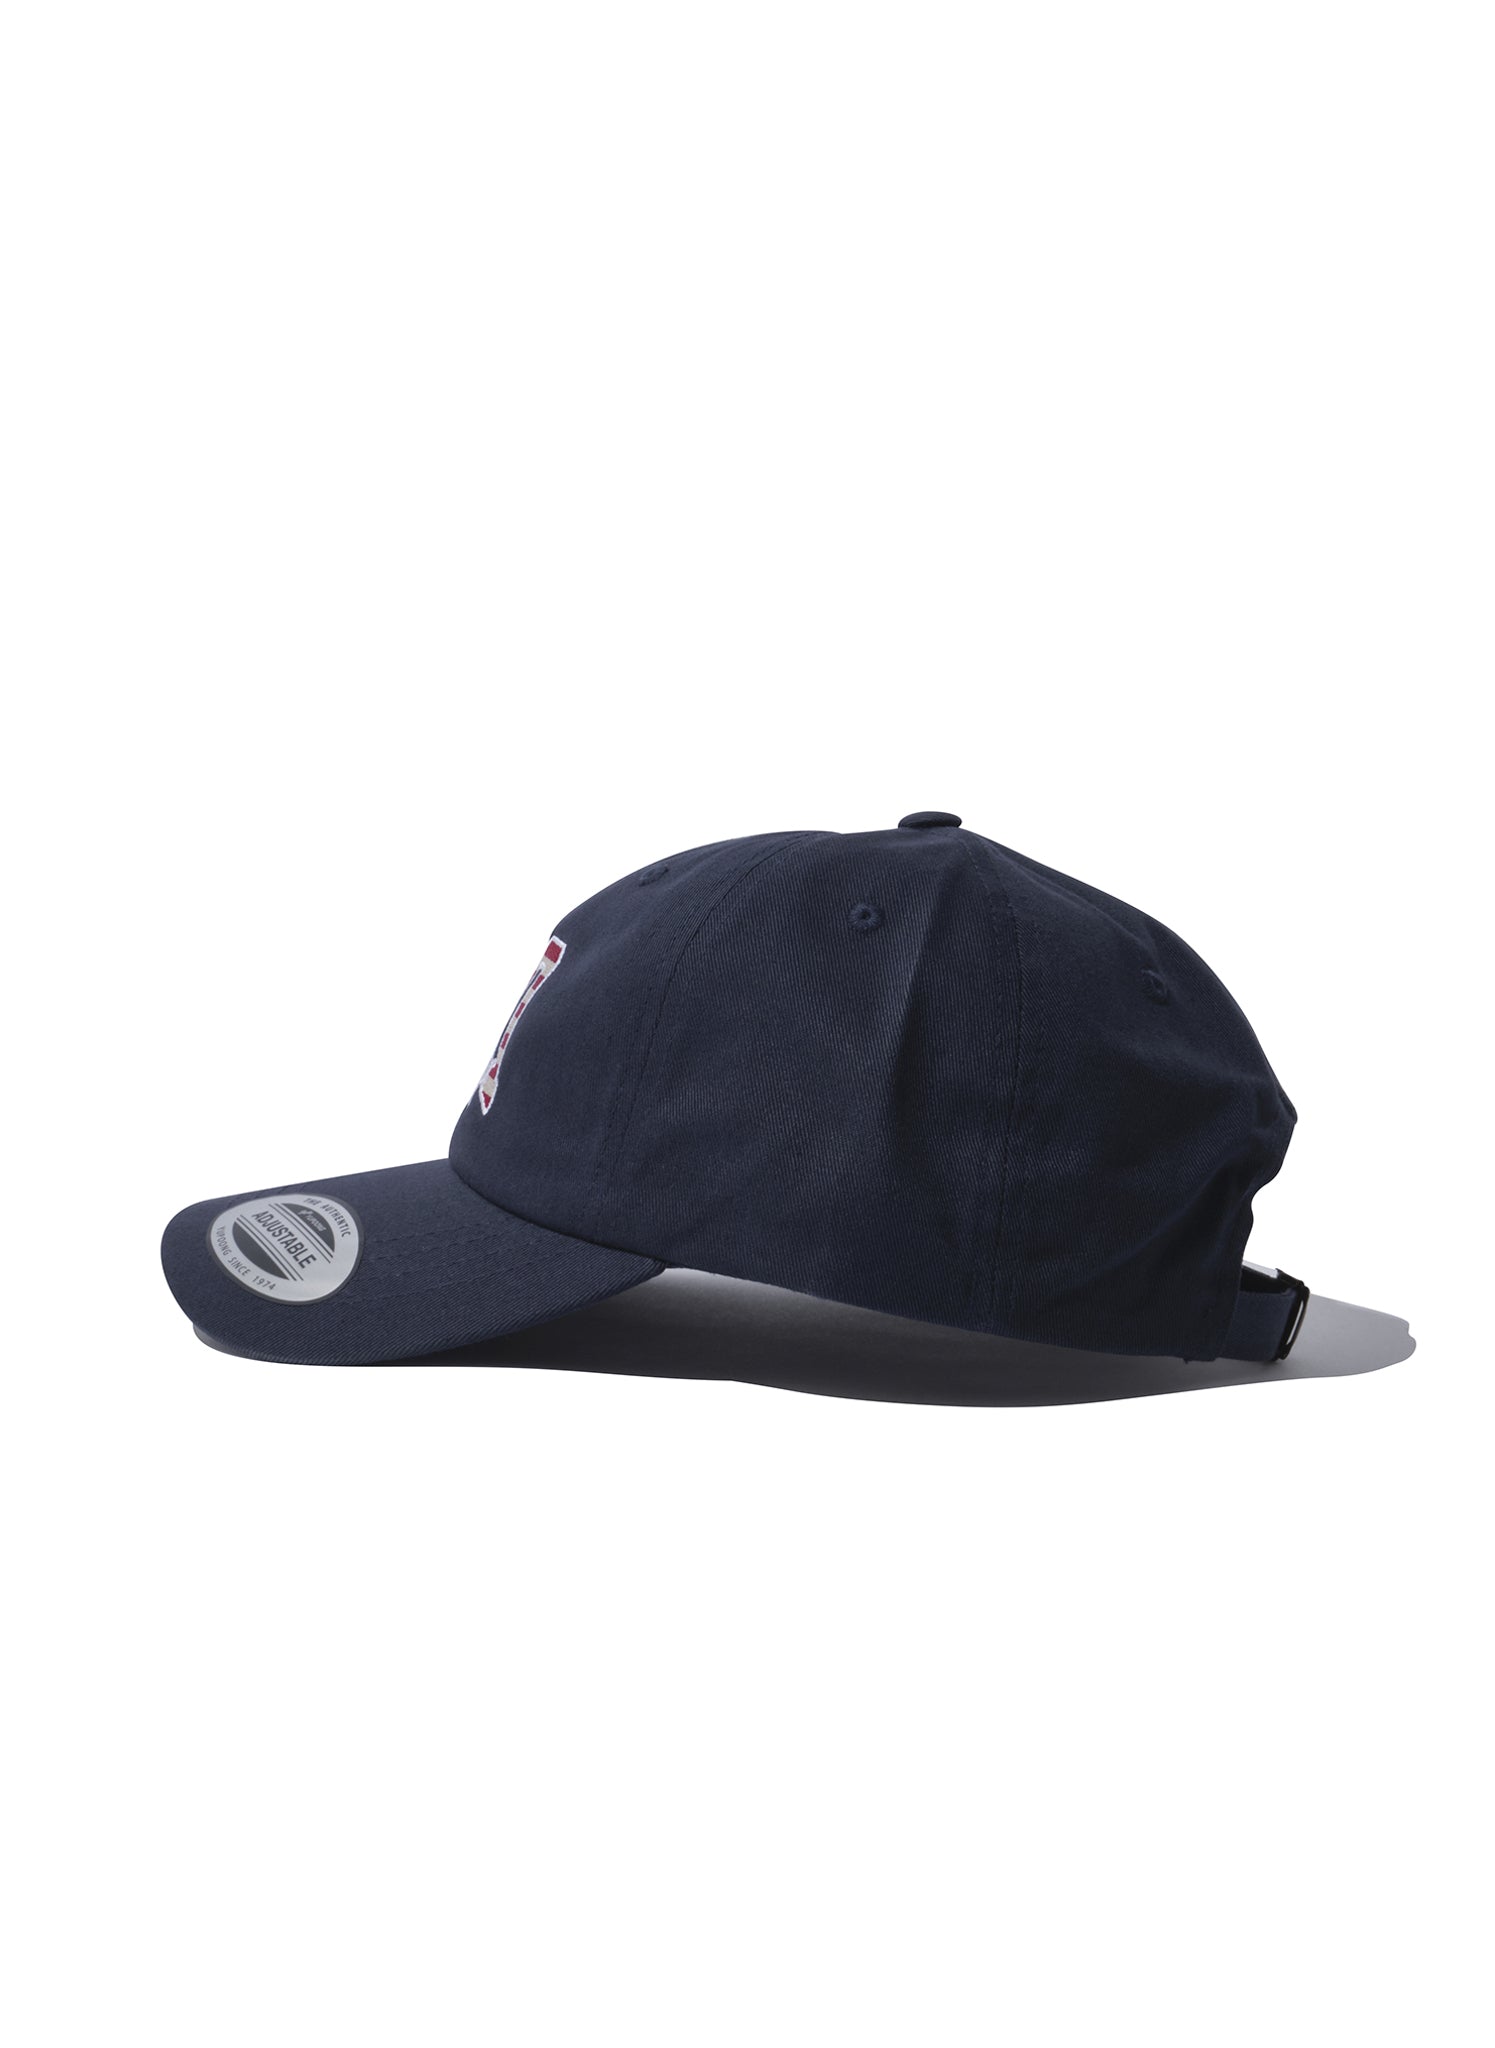 <span style="color: #f50b0b;">Last One</span> WILLY CHAVARRIA / WILLY CAP USA 2 NAVY